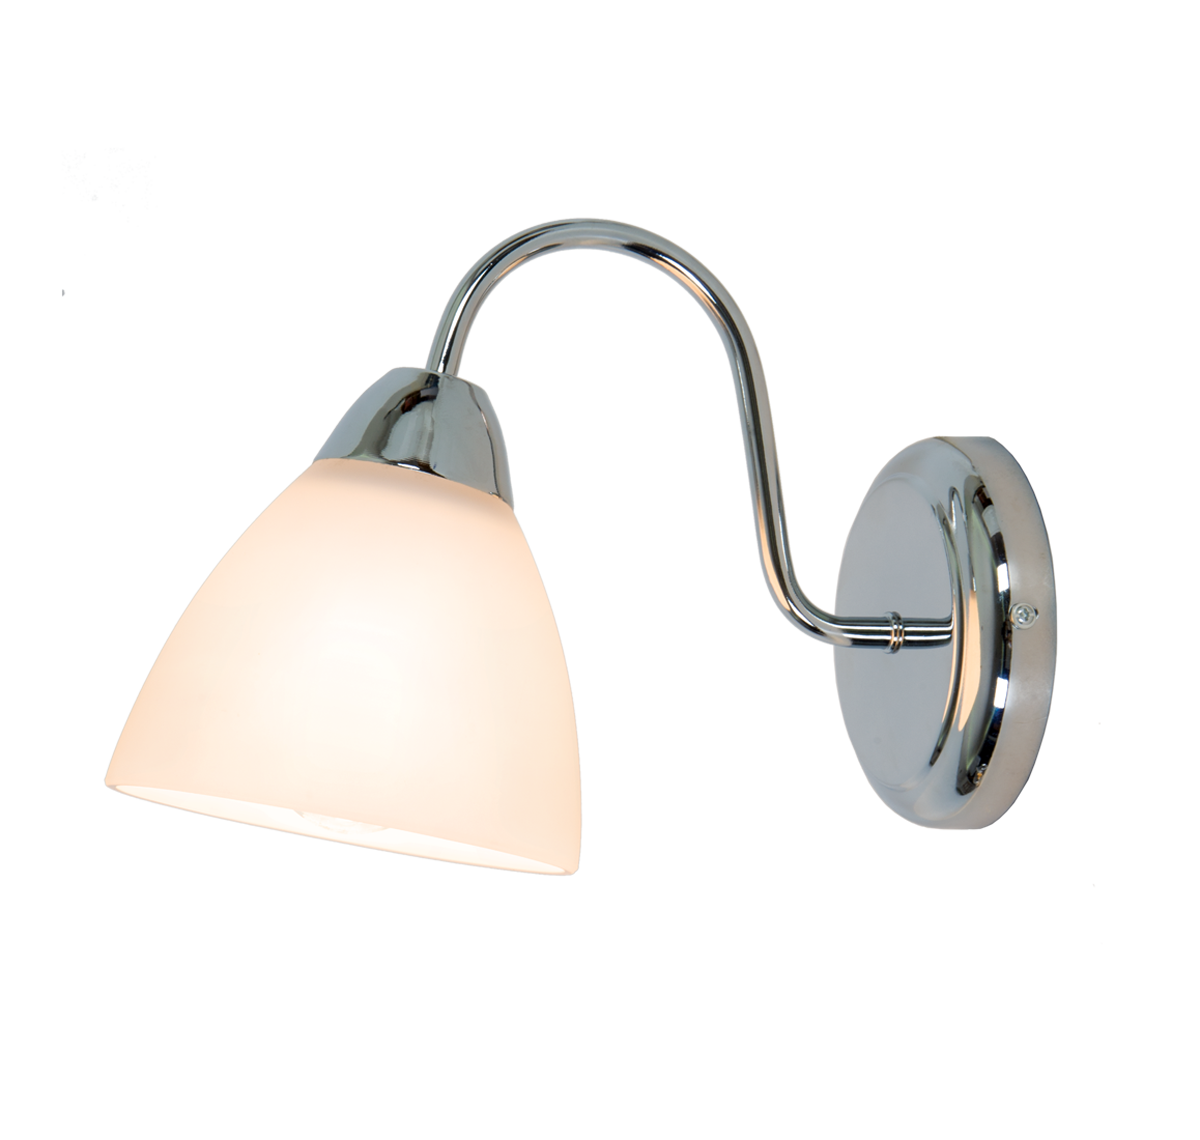 Havells Floretine WL 1LS E27 CRM Wall mounted, Wall light